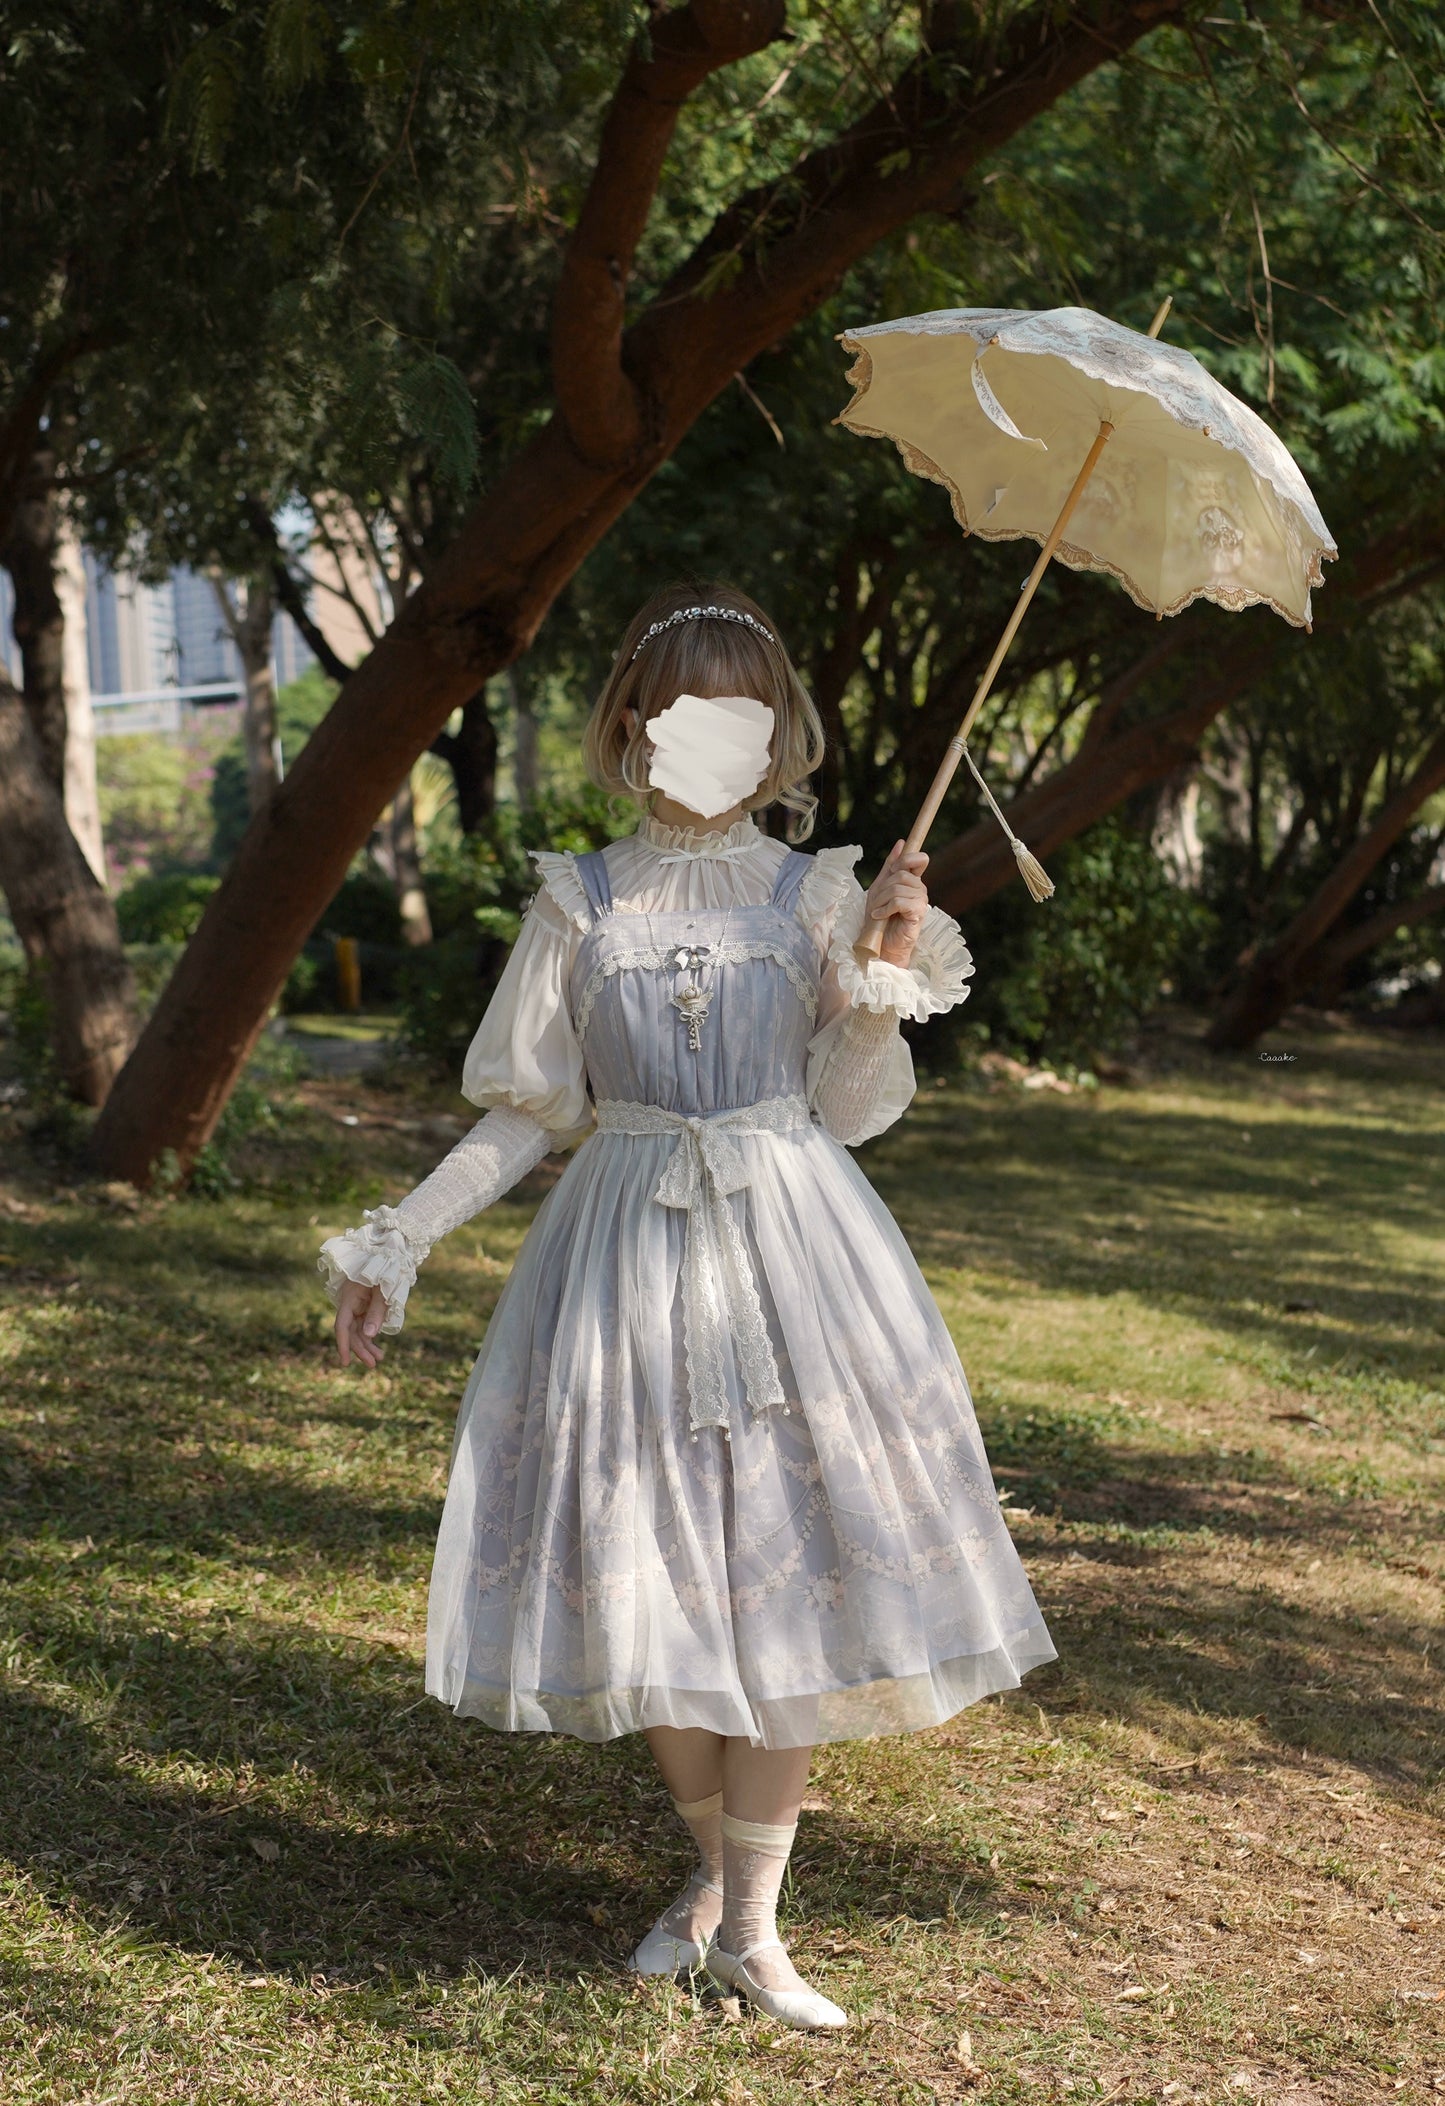 [Sale period ended] Romantic Memories Jumper skirt with veil